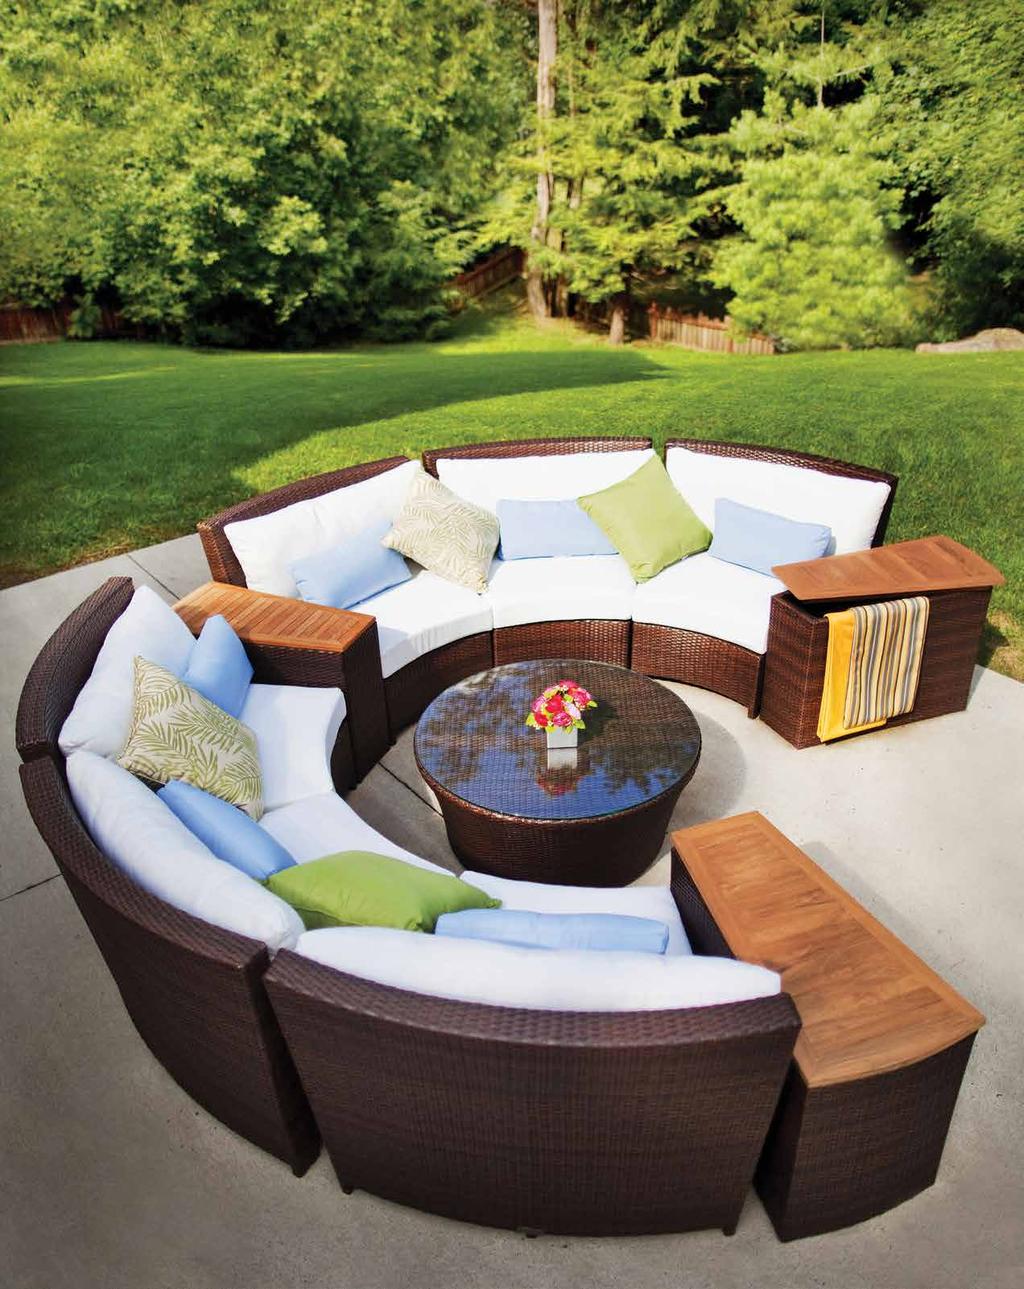 Lotus Armless Chair Lotus Coffee Table Lotus Sectional This patio set is exceptionally